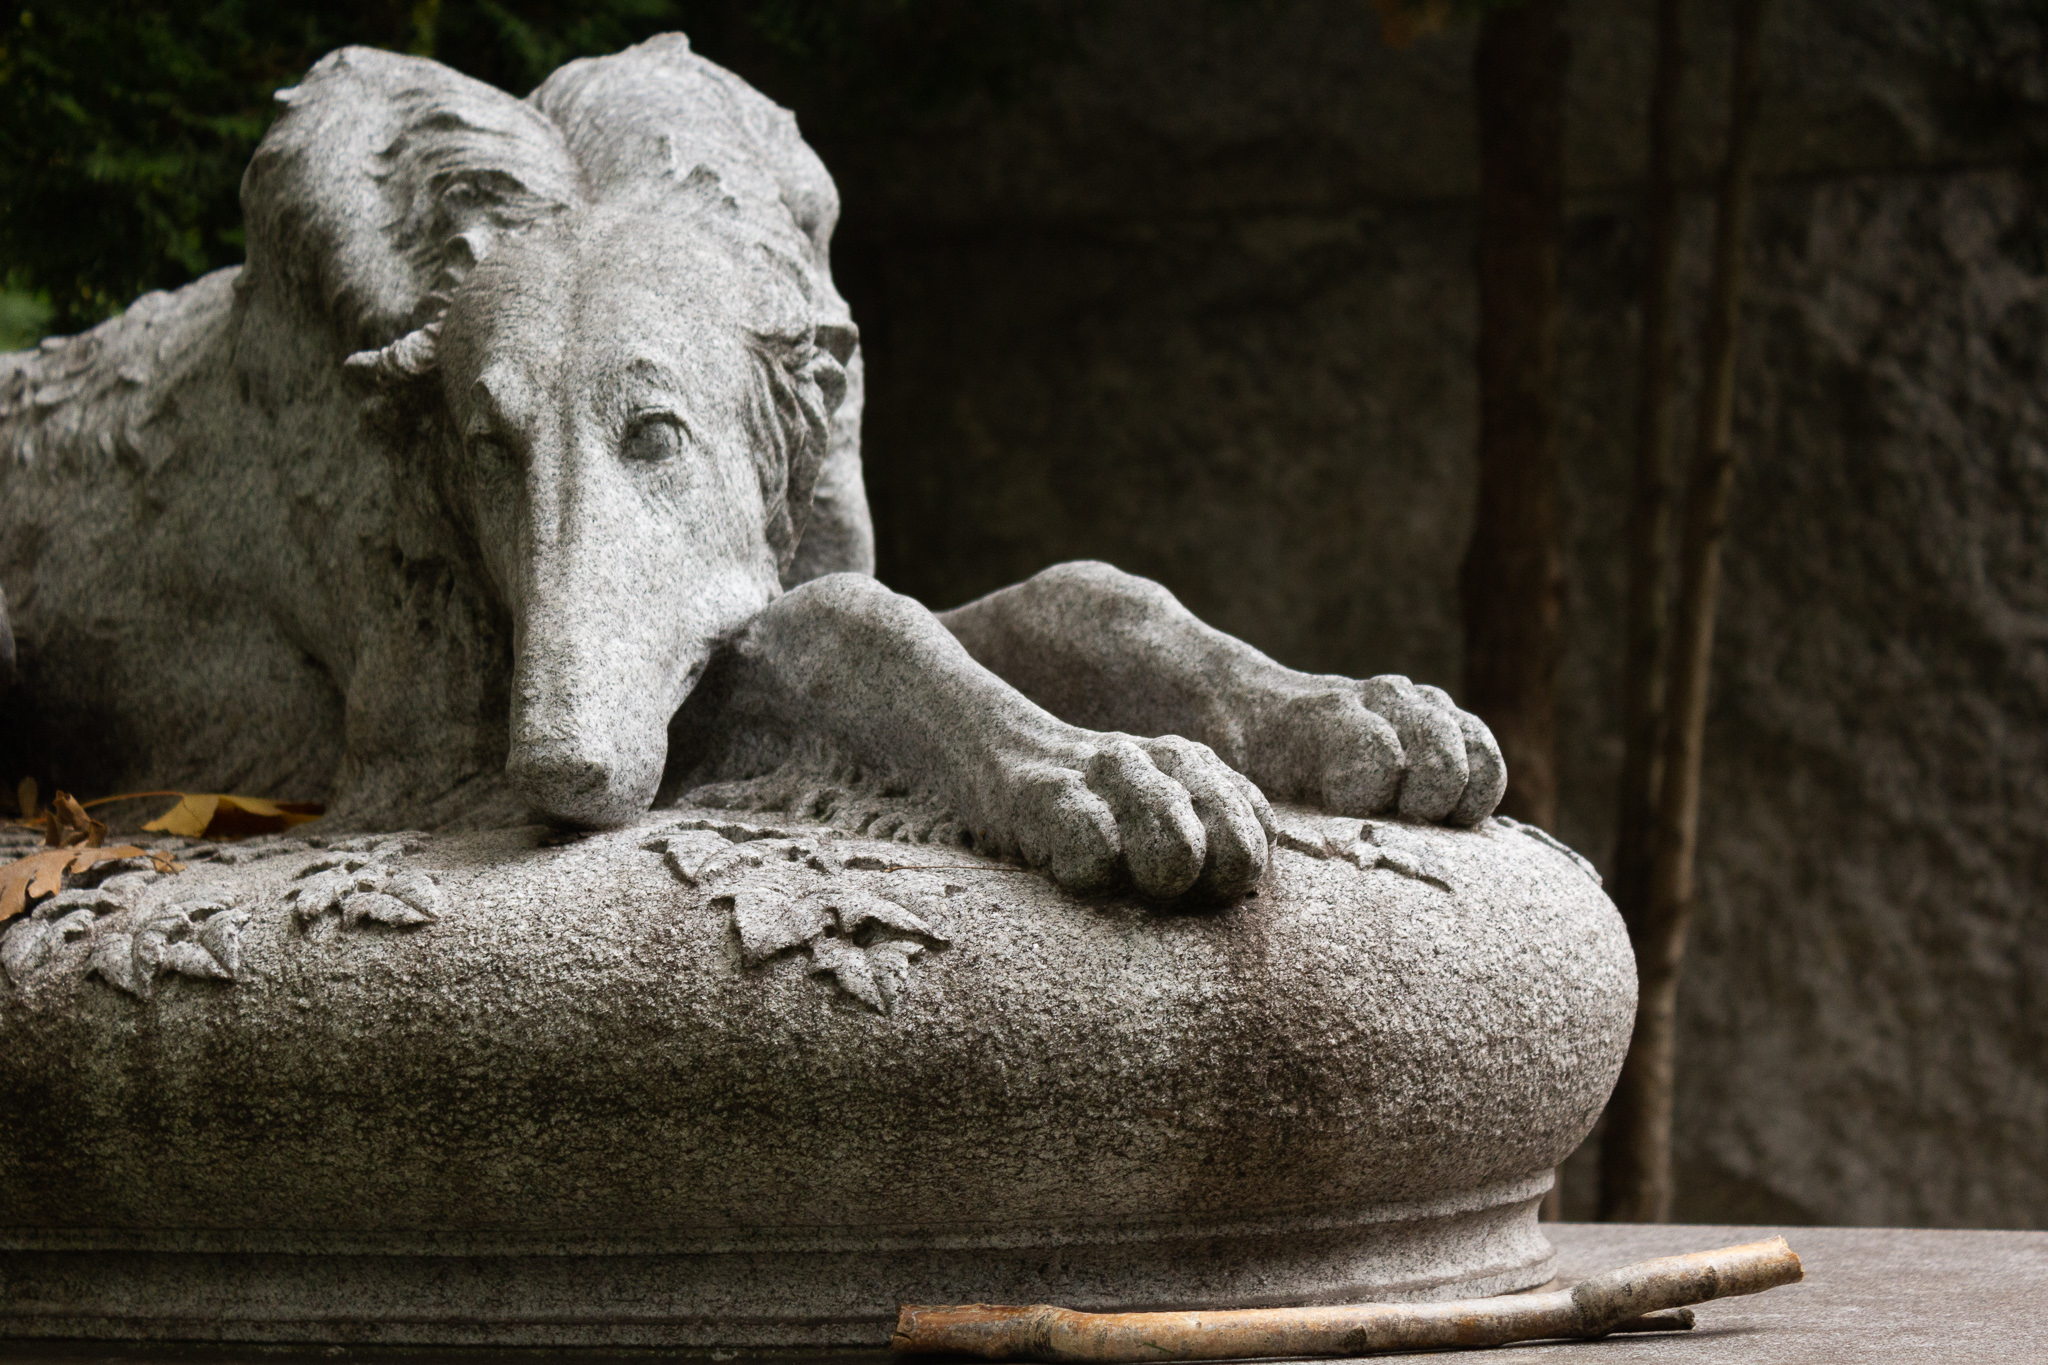 A stone wolfhound sculpted on top of a tombstone, a real stick laid in front of it